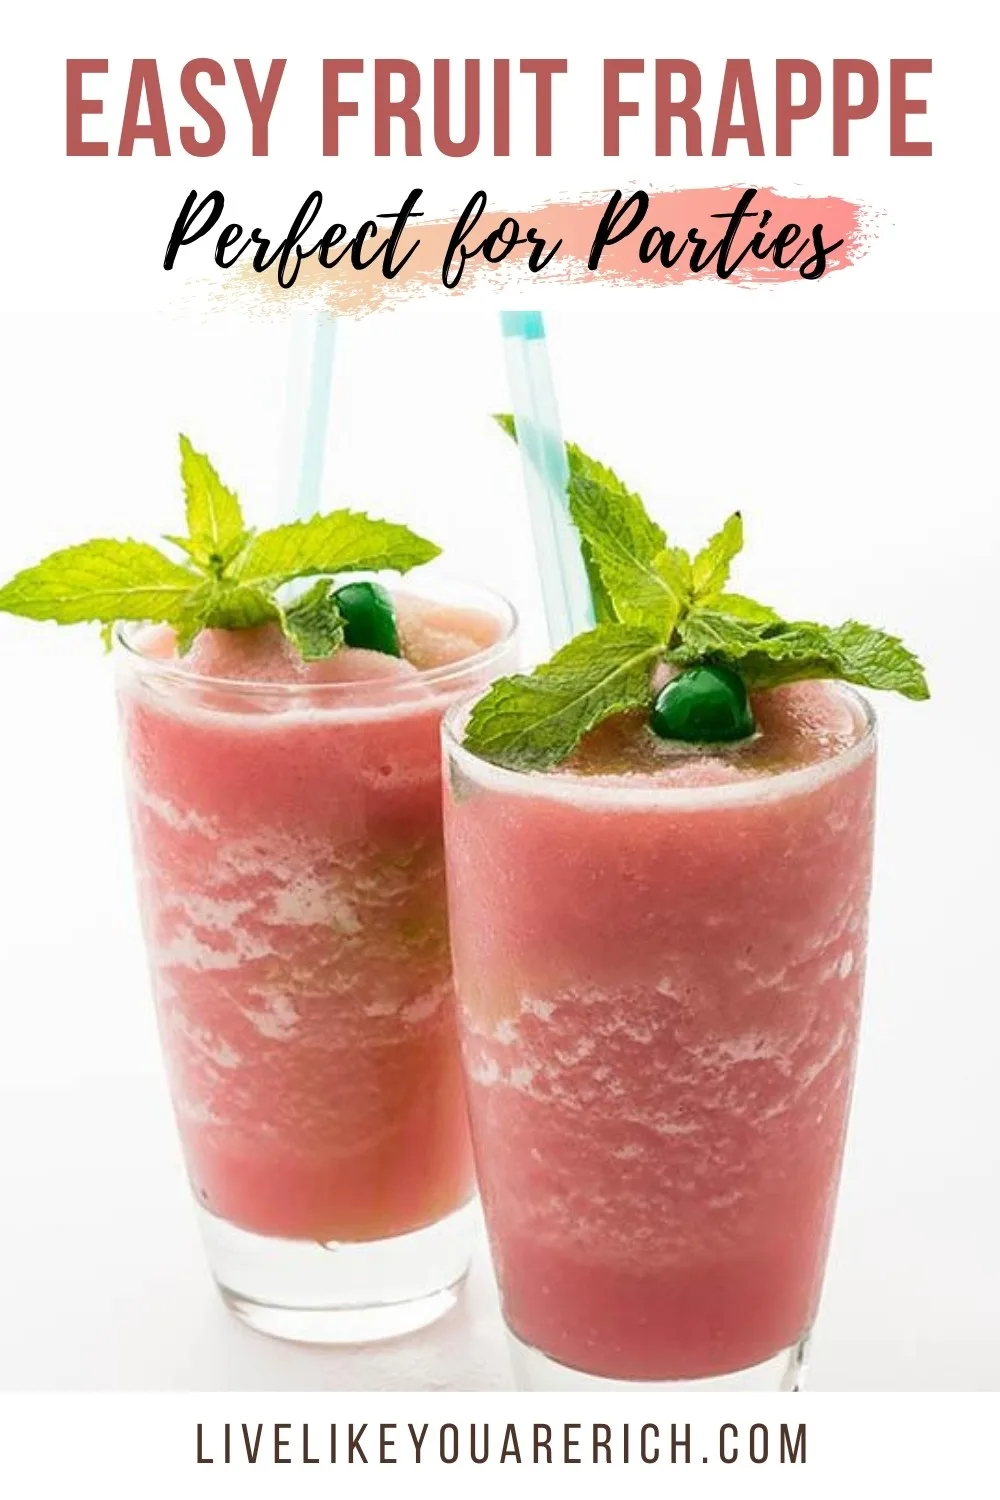 We've been making this fruit frappe for special occasions and everyone loves it. It's great for baby showers, birthday parties, family get-togethers etc. It only takes about 5 minutes and requires 2 ingredients. You can make a variety of different flavors too.